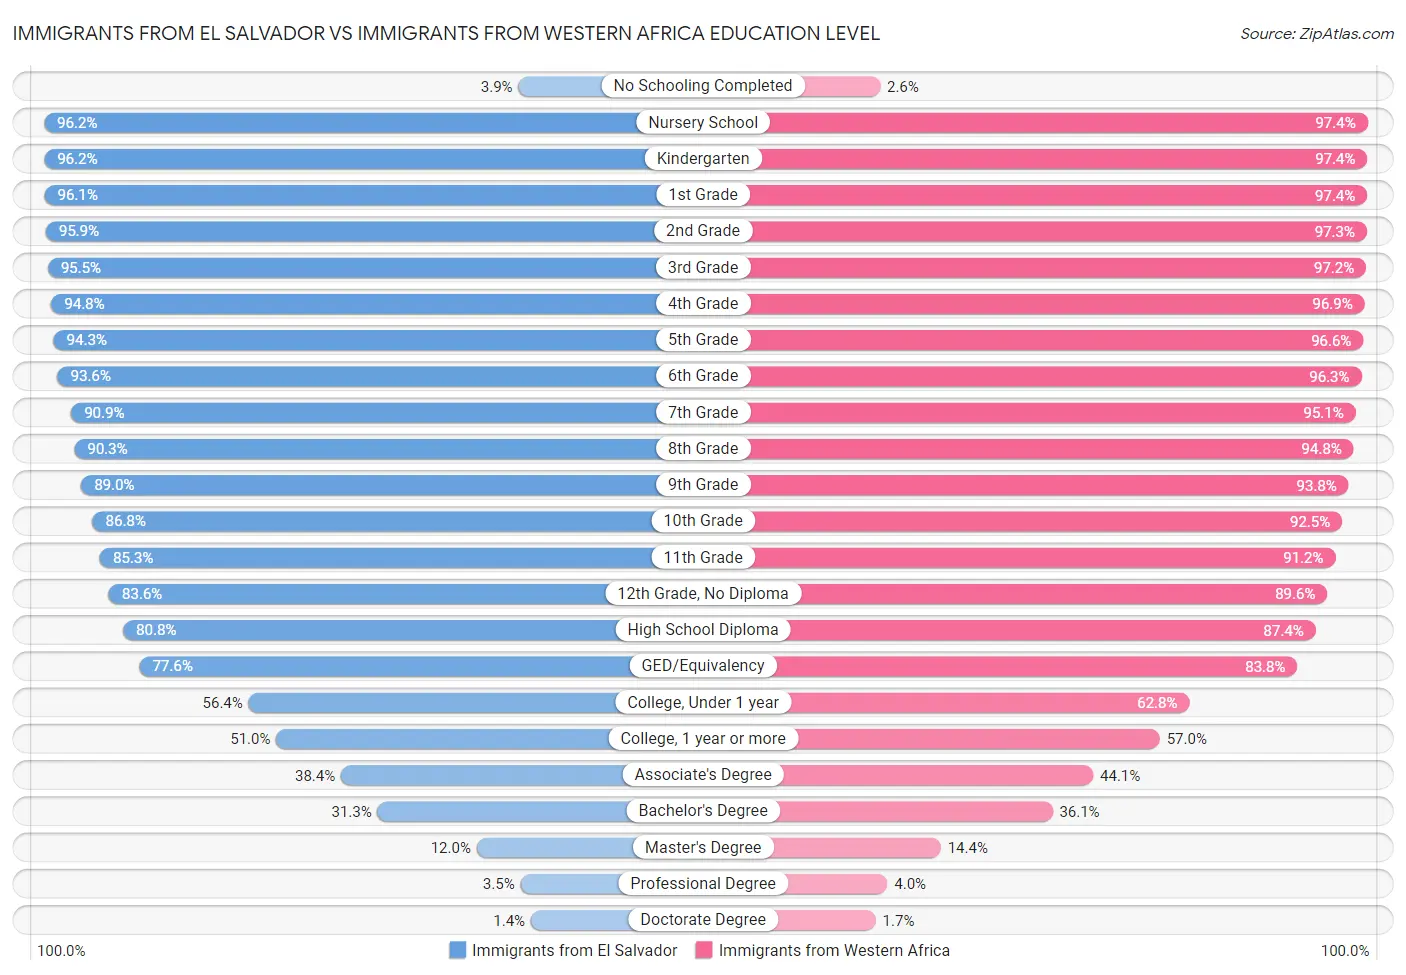 Immigrants from El Salvador vs Immigrants from Western Africa Education Level